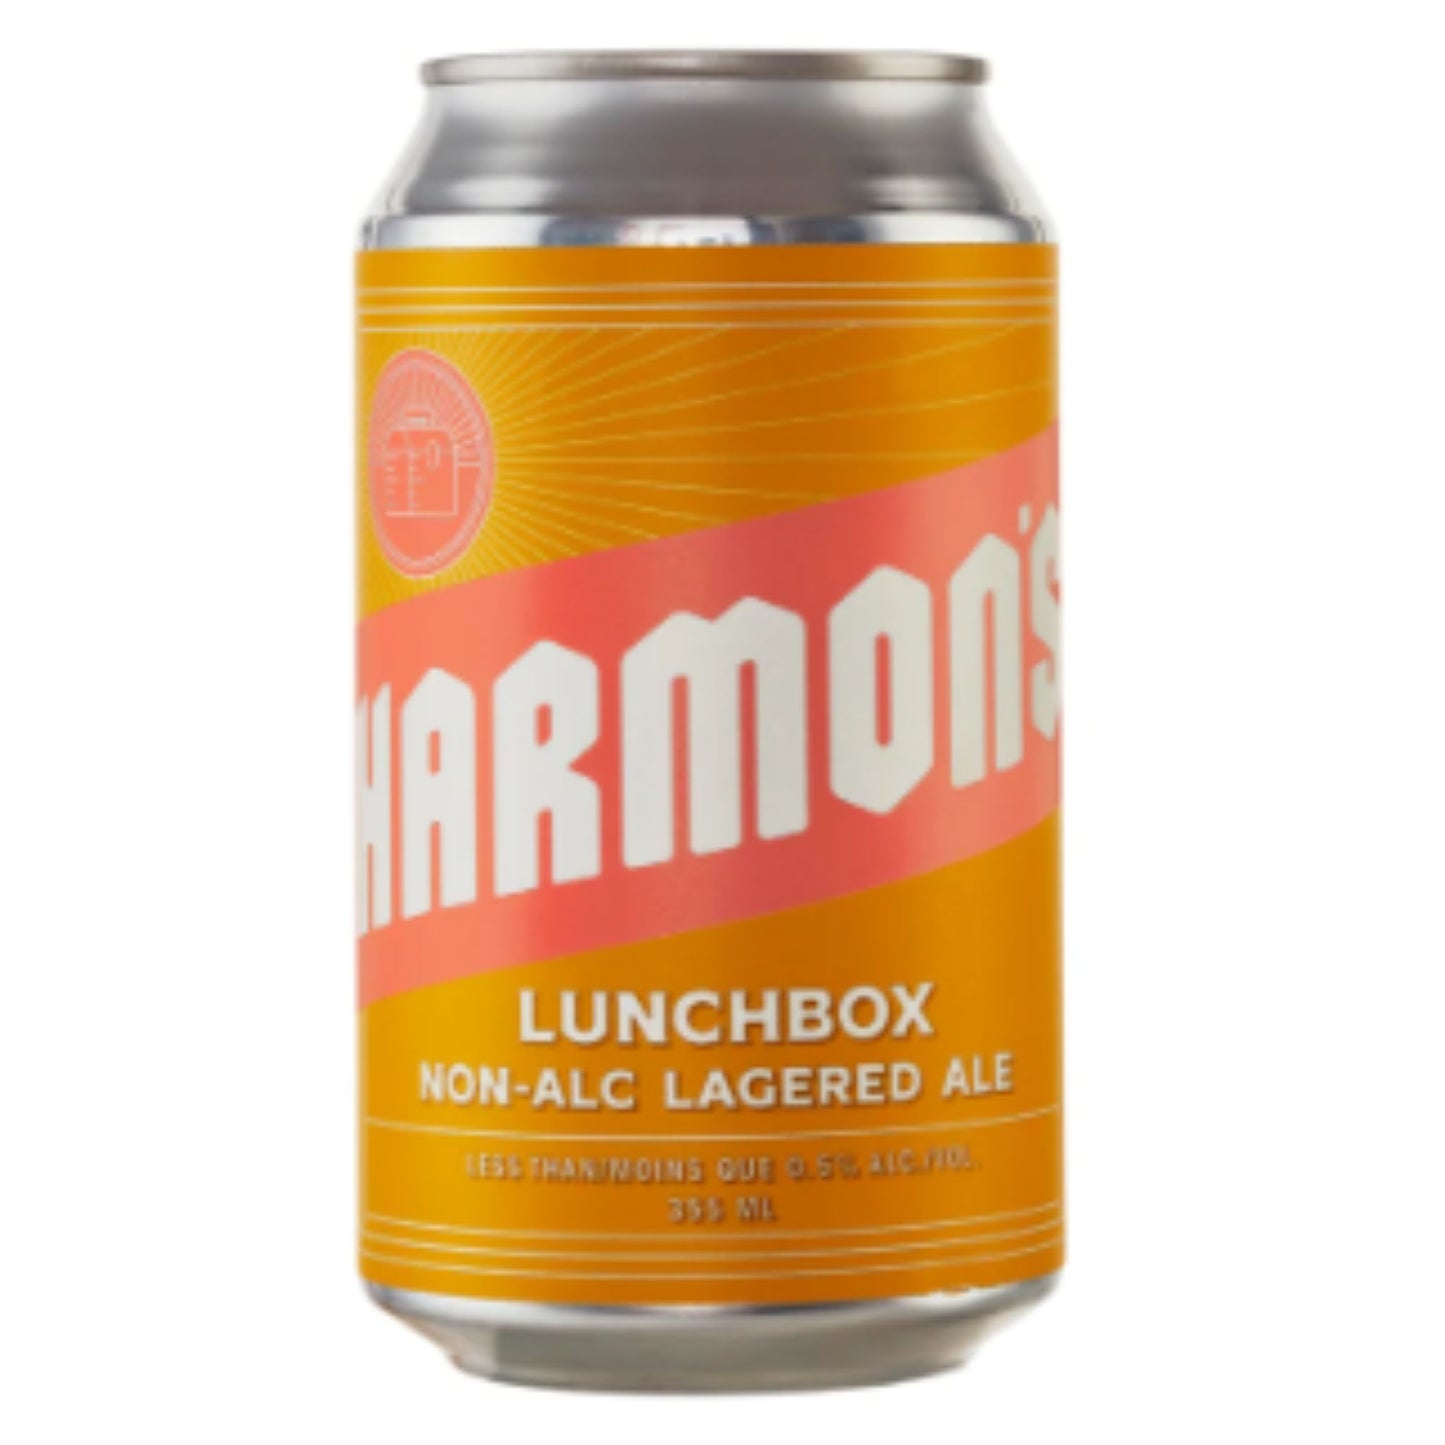 Harmon's Lunch Box Lagered Ale is available for purchase from Knyota Drinks in Ottawa.